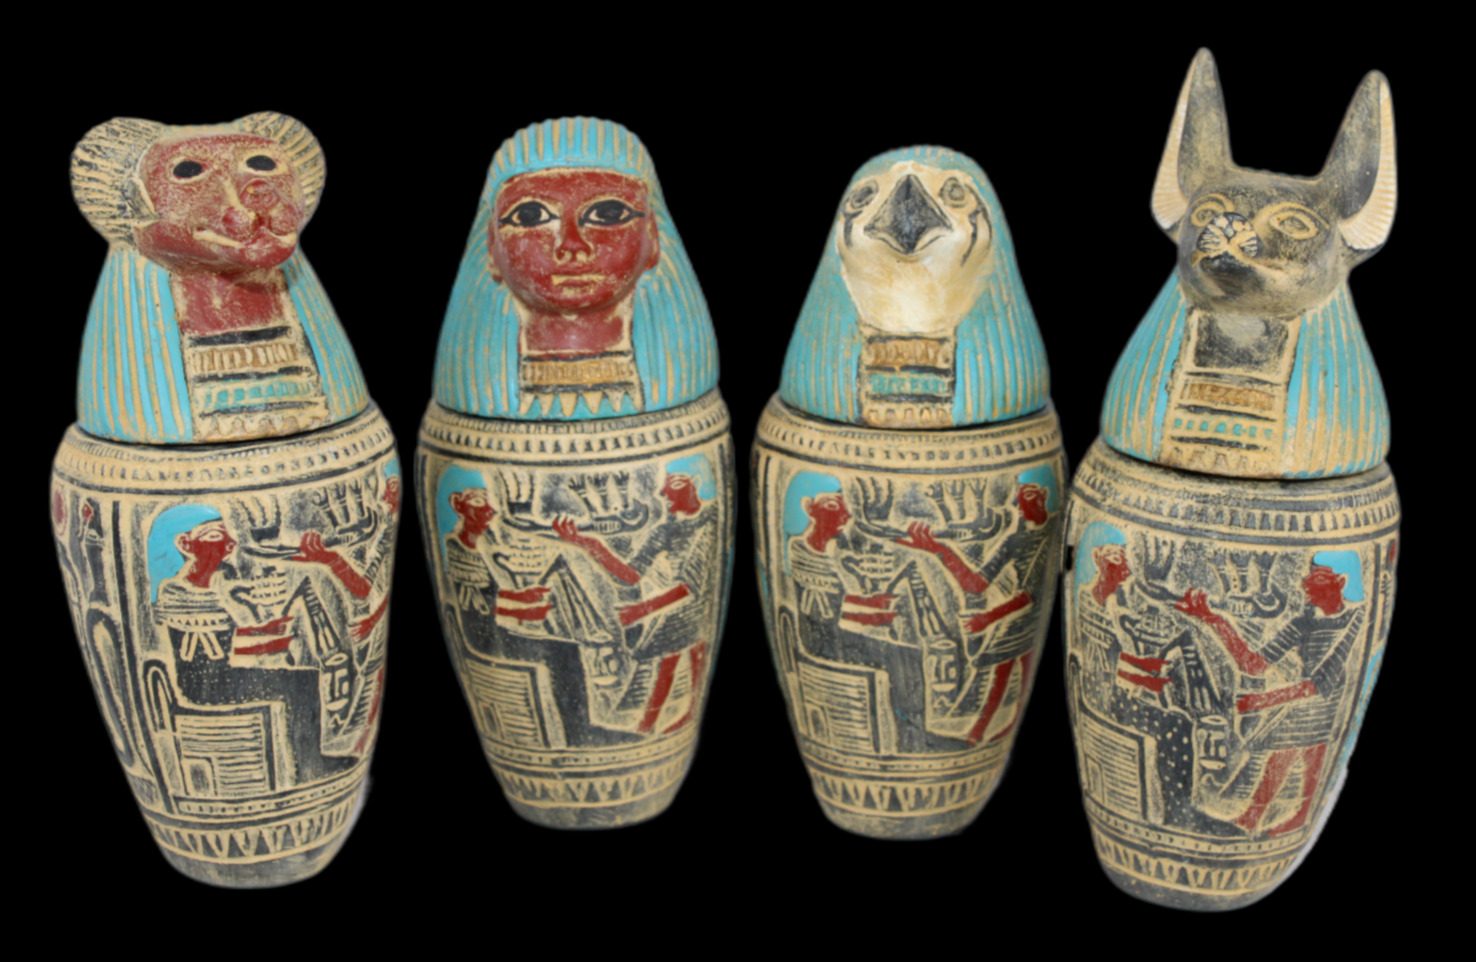 RARE ANCIENT EGYPTIAN ANTIQUE 4 Mummification Canopic Jars Old Pharaonic Statues